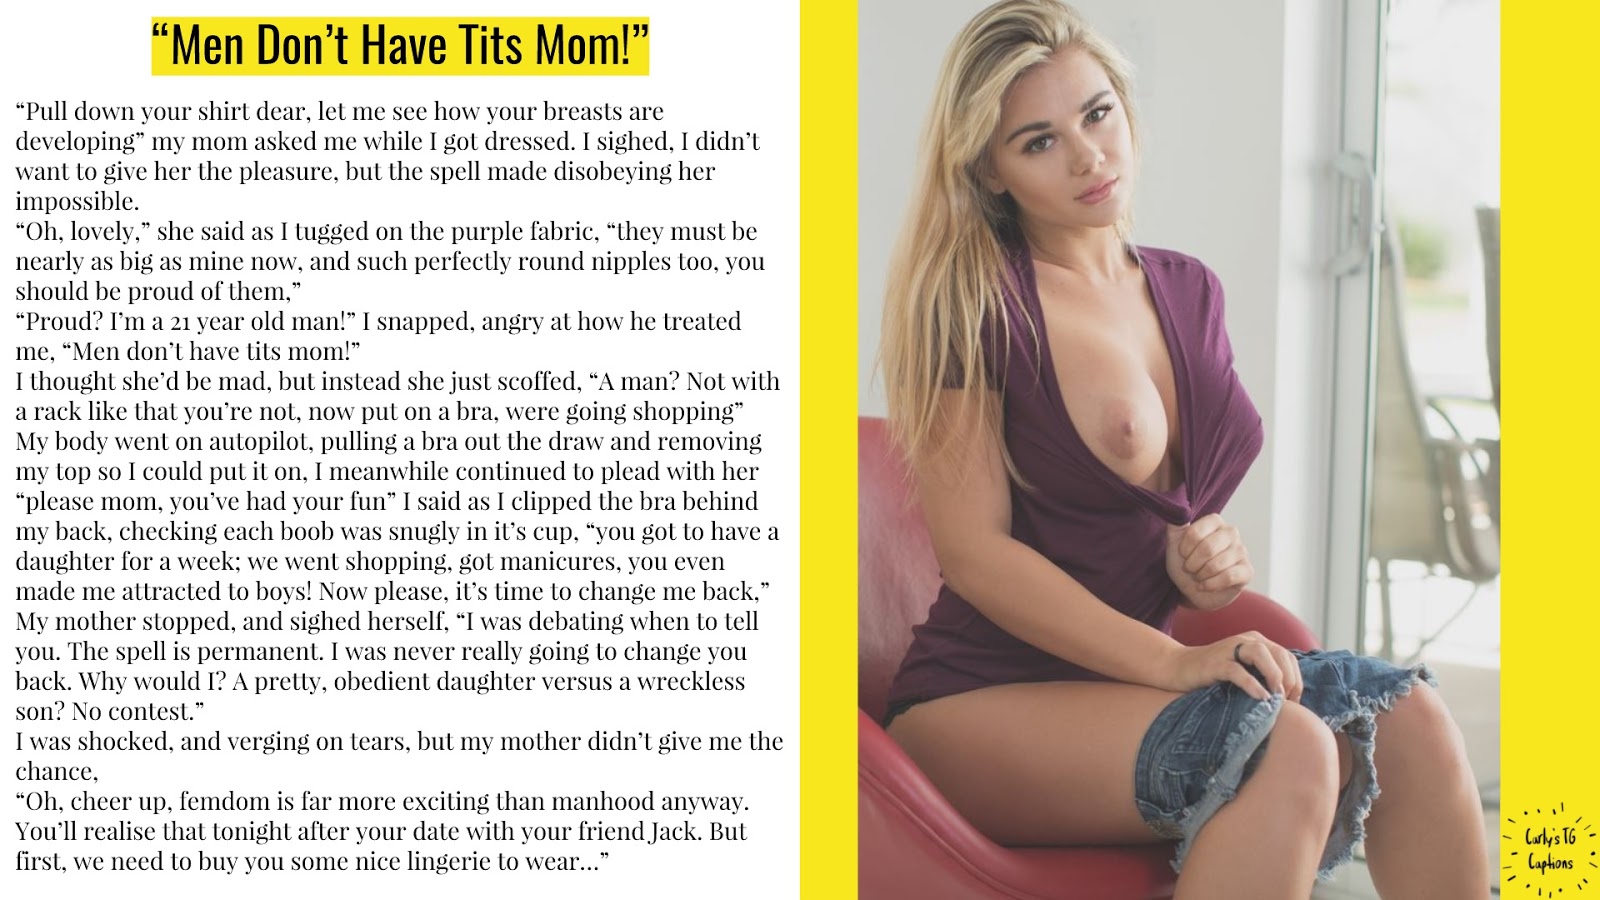 Forced TG Caption: "Men Don't Have Tits Mom! 